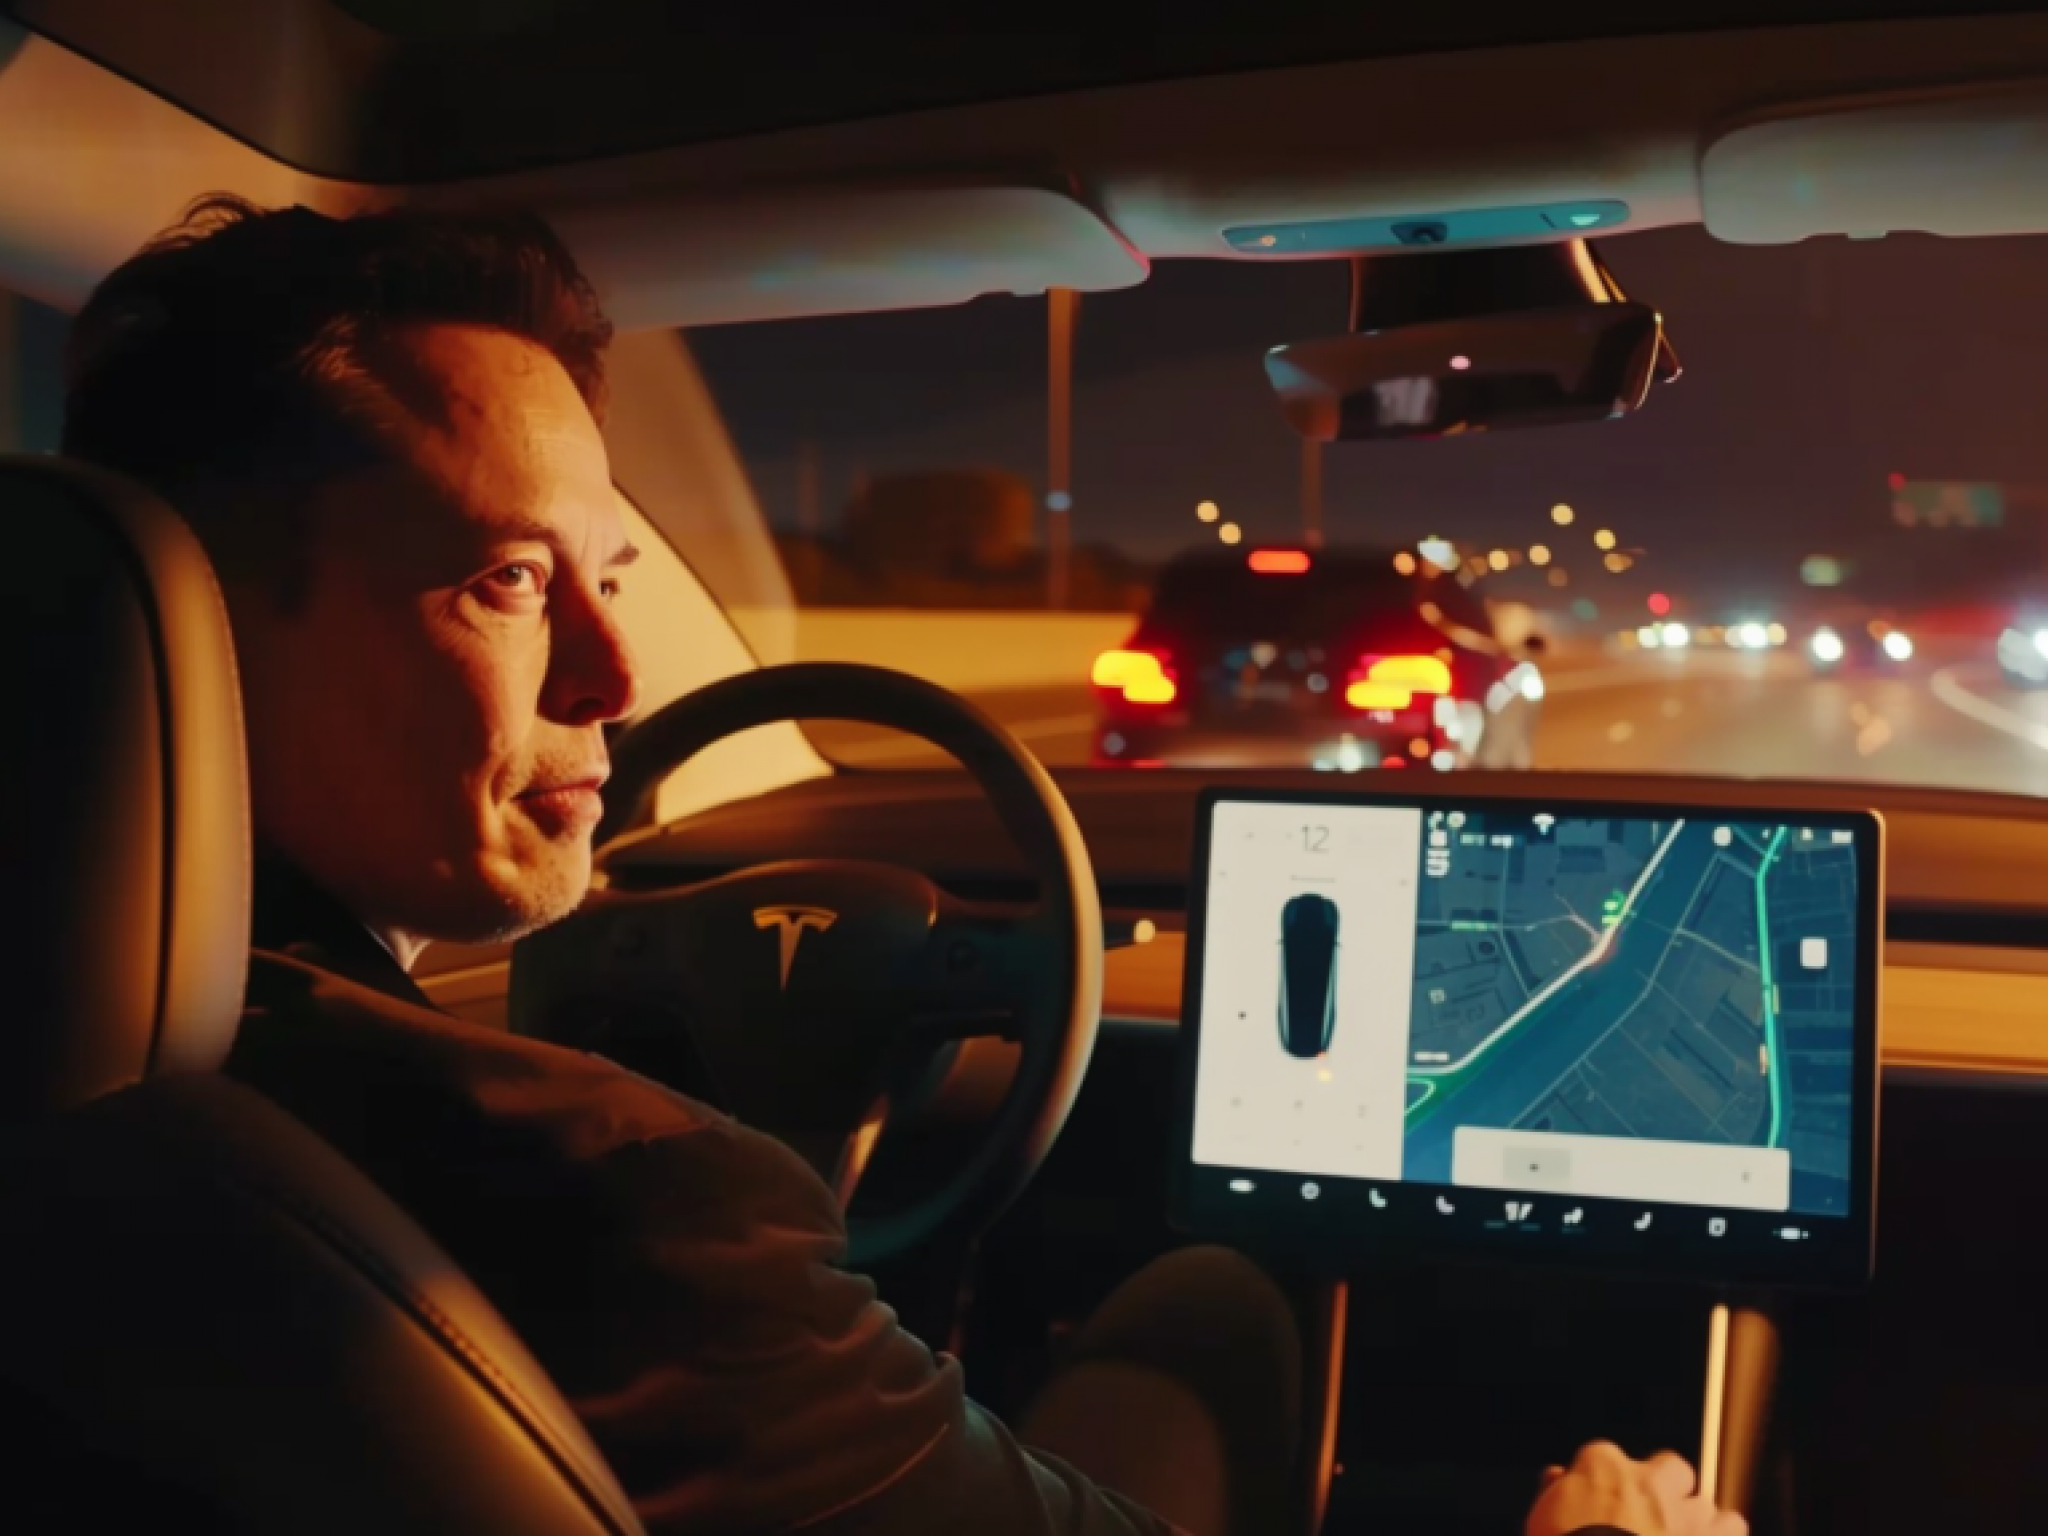  tesla-wont-be-granted-robotaxi-licenses-to-offer-rides-if-it-isnt-able-to-match-googles-self-driving-company-says-gary-black-waymo-is-the-standard 